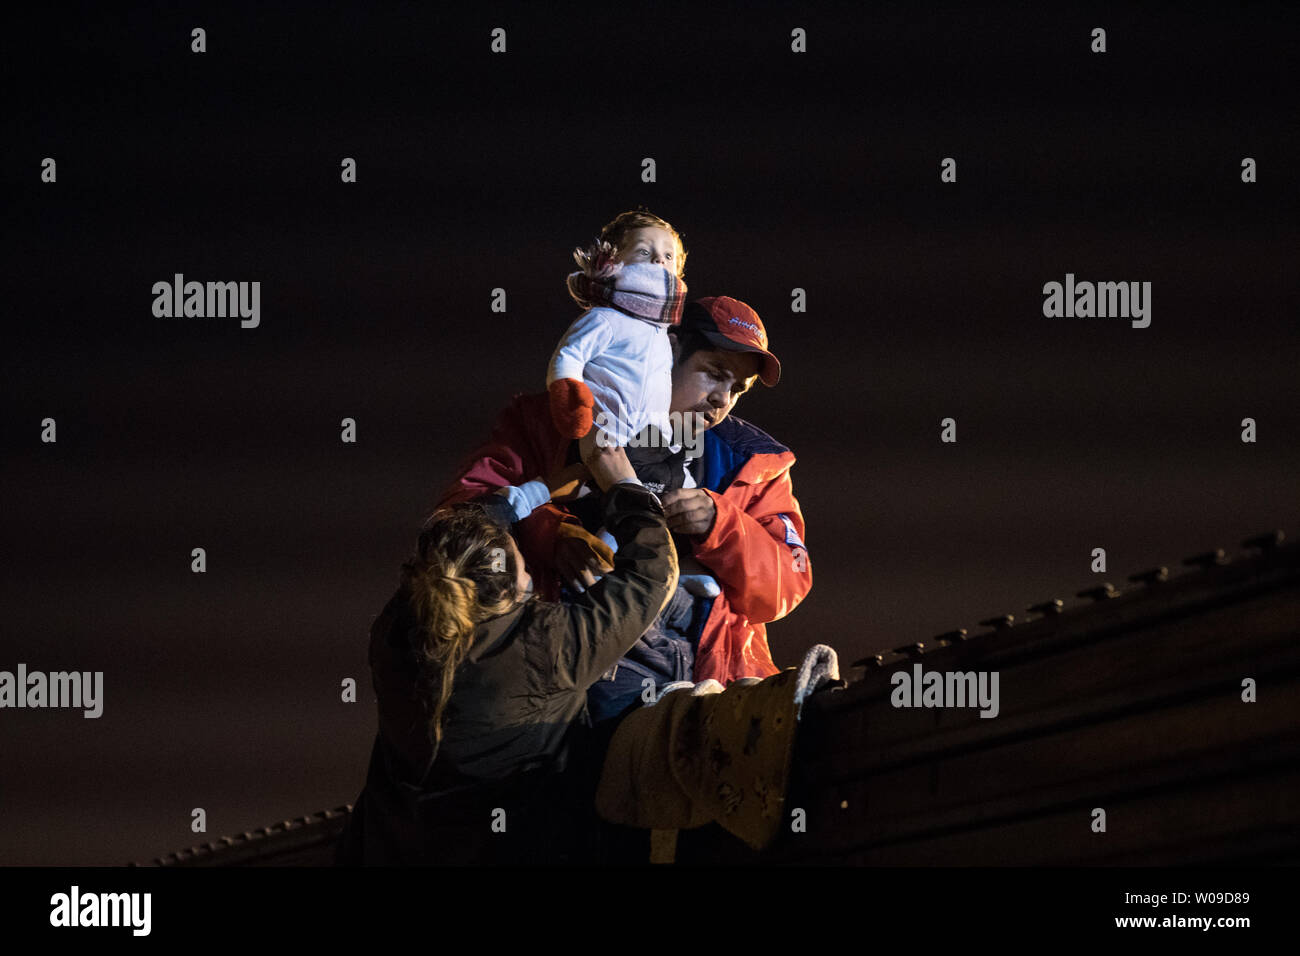 A family from Honduras traveling with the migrant caravan gets ready to climb the fence in Tijuana, Mexico on December 26, 2018.   Frustration has been growing in the last few weeks at the length of the asylum process so instead of continuing to wait some migrants are trying to climb the fence from Tijuana to seek asylum in the United States.   The U.S. government is in a partial shutdown due to a funding argument about the border.   Photo by Ariana Drehsler/UPI Stock Photo